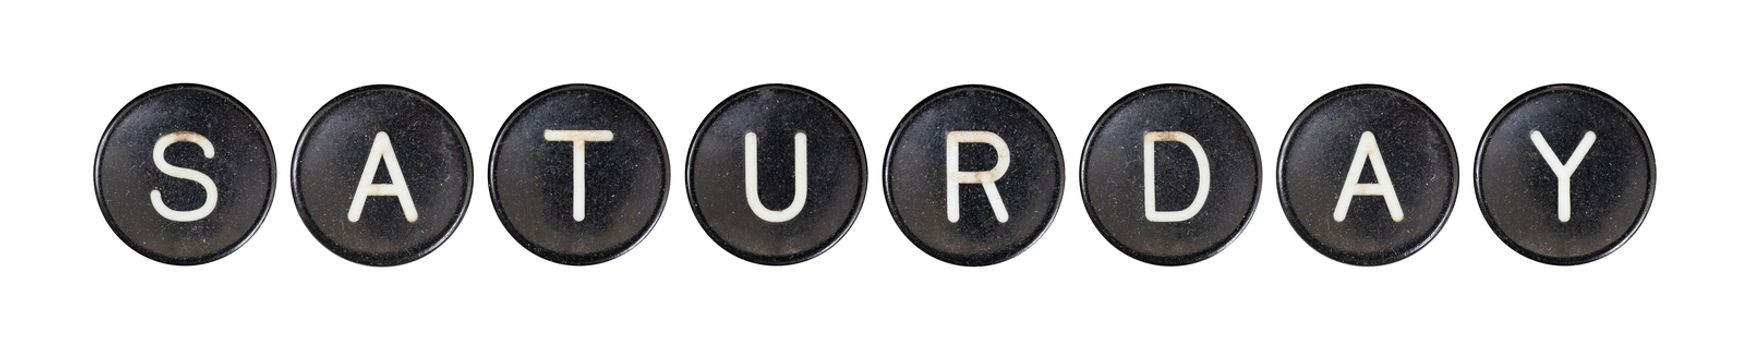 Typewriter buttons, isolated on white background - Saturday